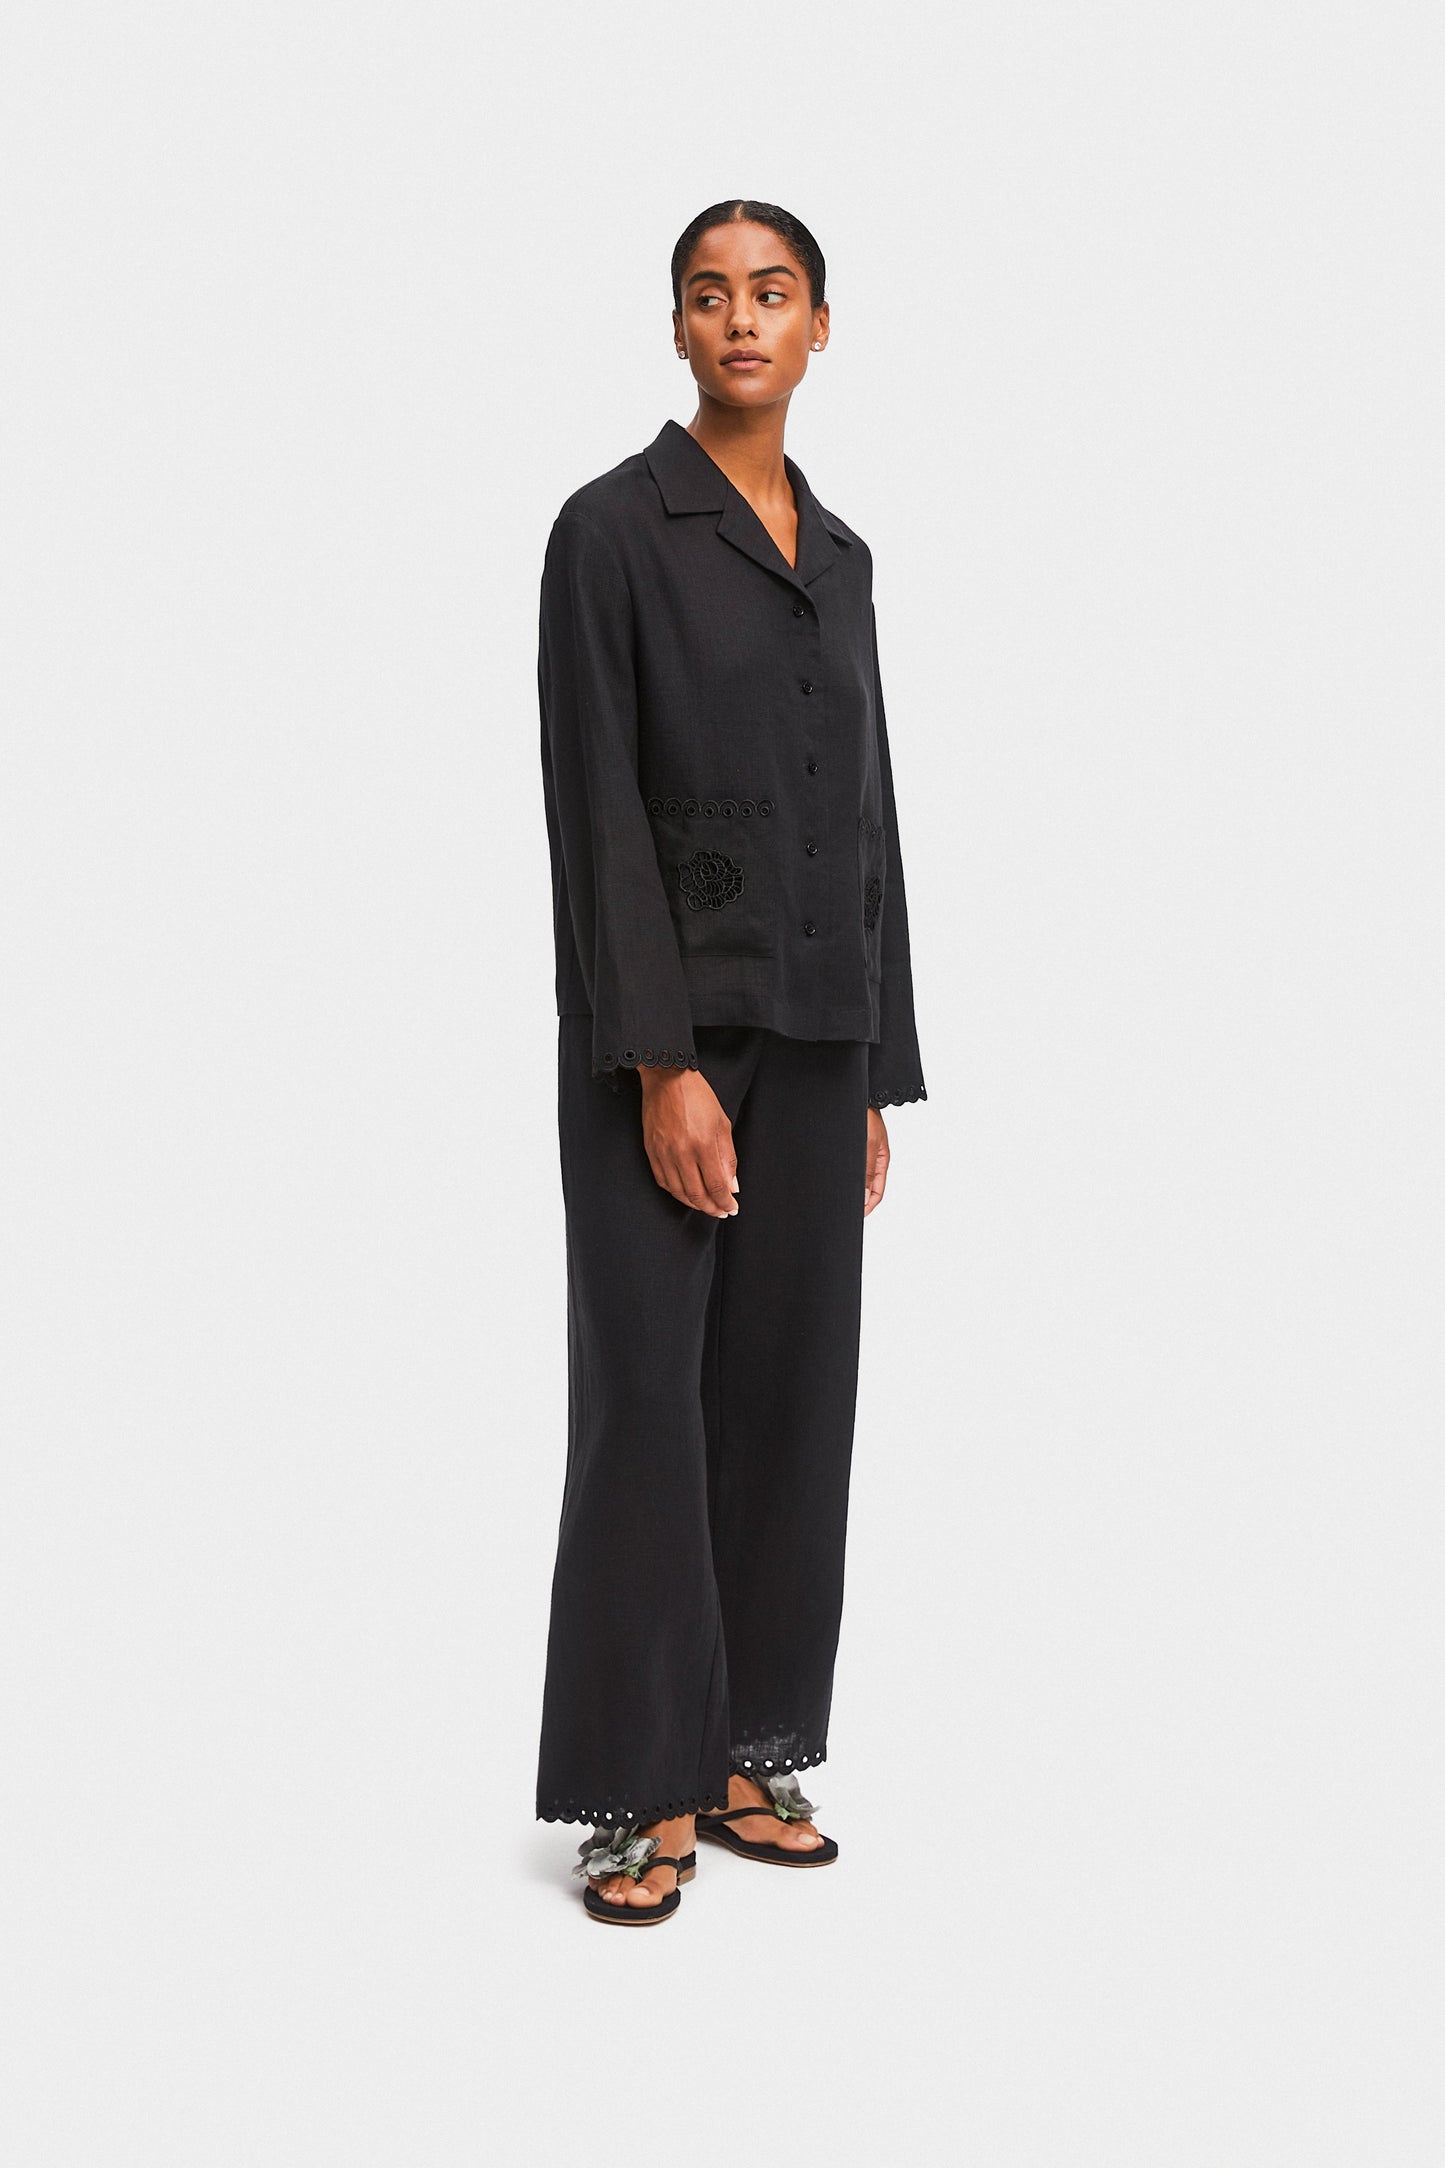 Sofia Linen Embroidered Shirt in Black